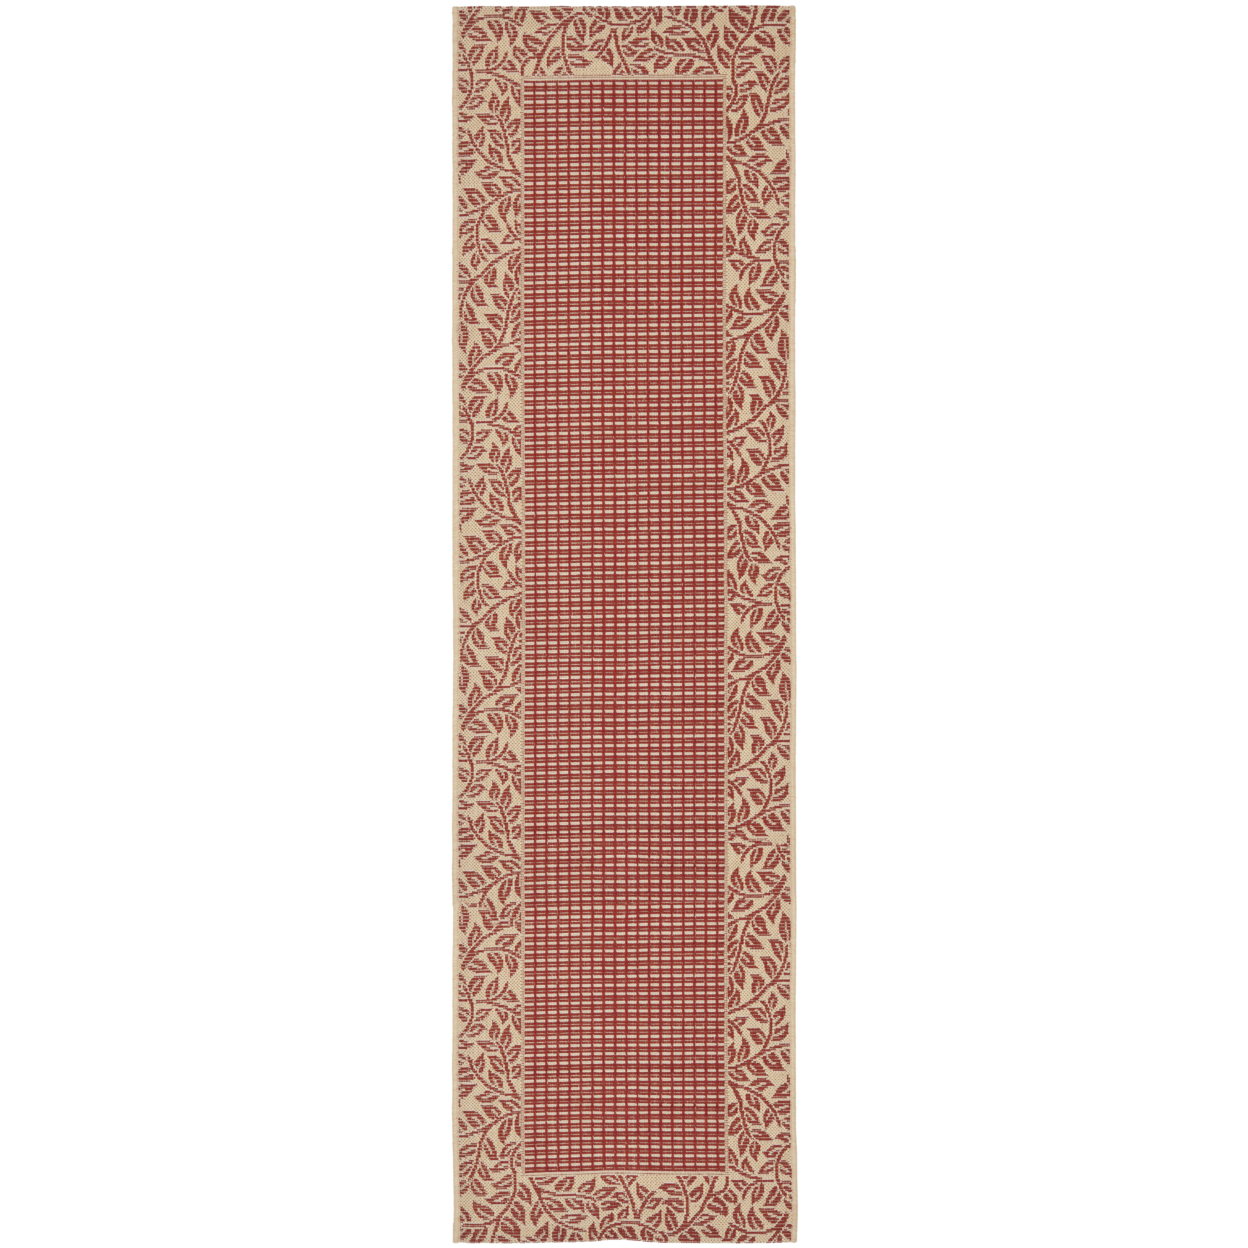 SAFAVIEH Courtyard CY0727-3707 Red / Natural Rug - 2' 3 X 10'